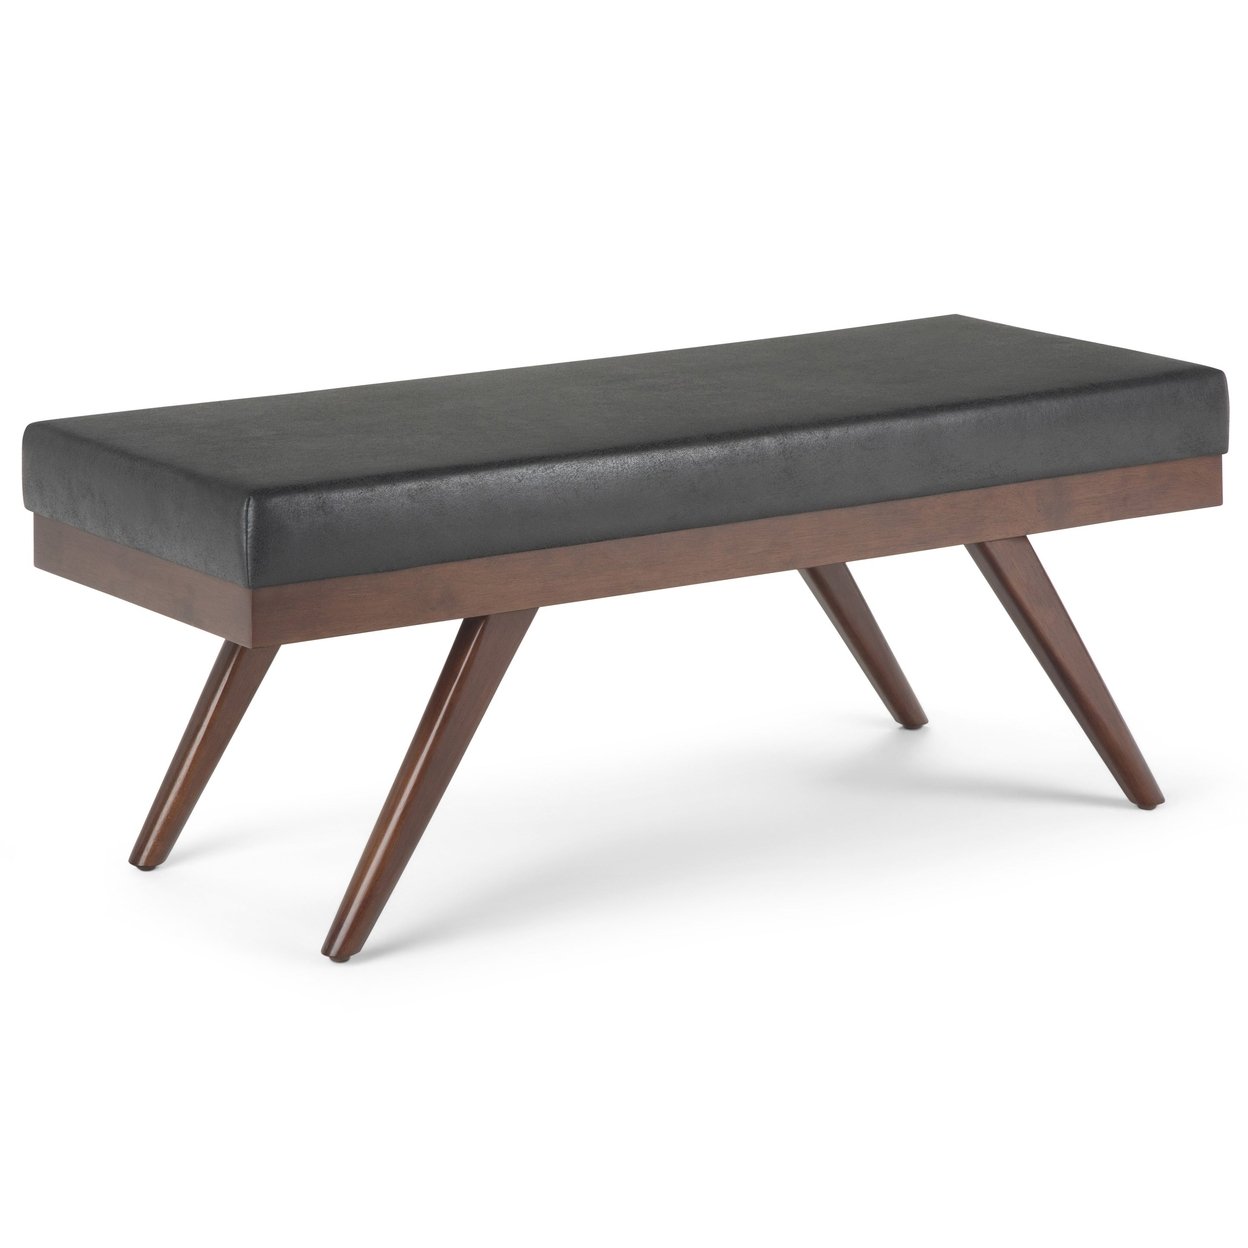 Simpli Home Chanelle Ottoman Bench in Distressed Vegan Leather